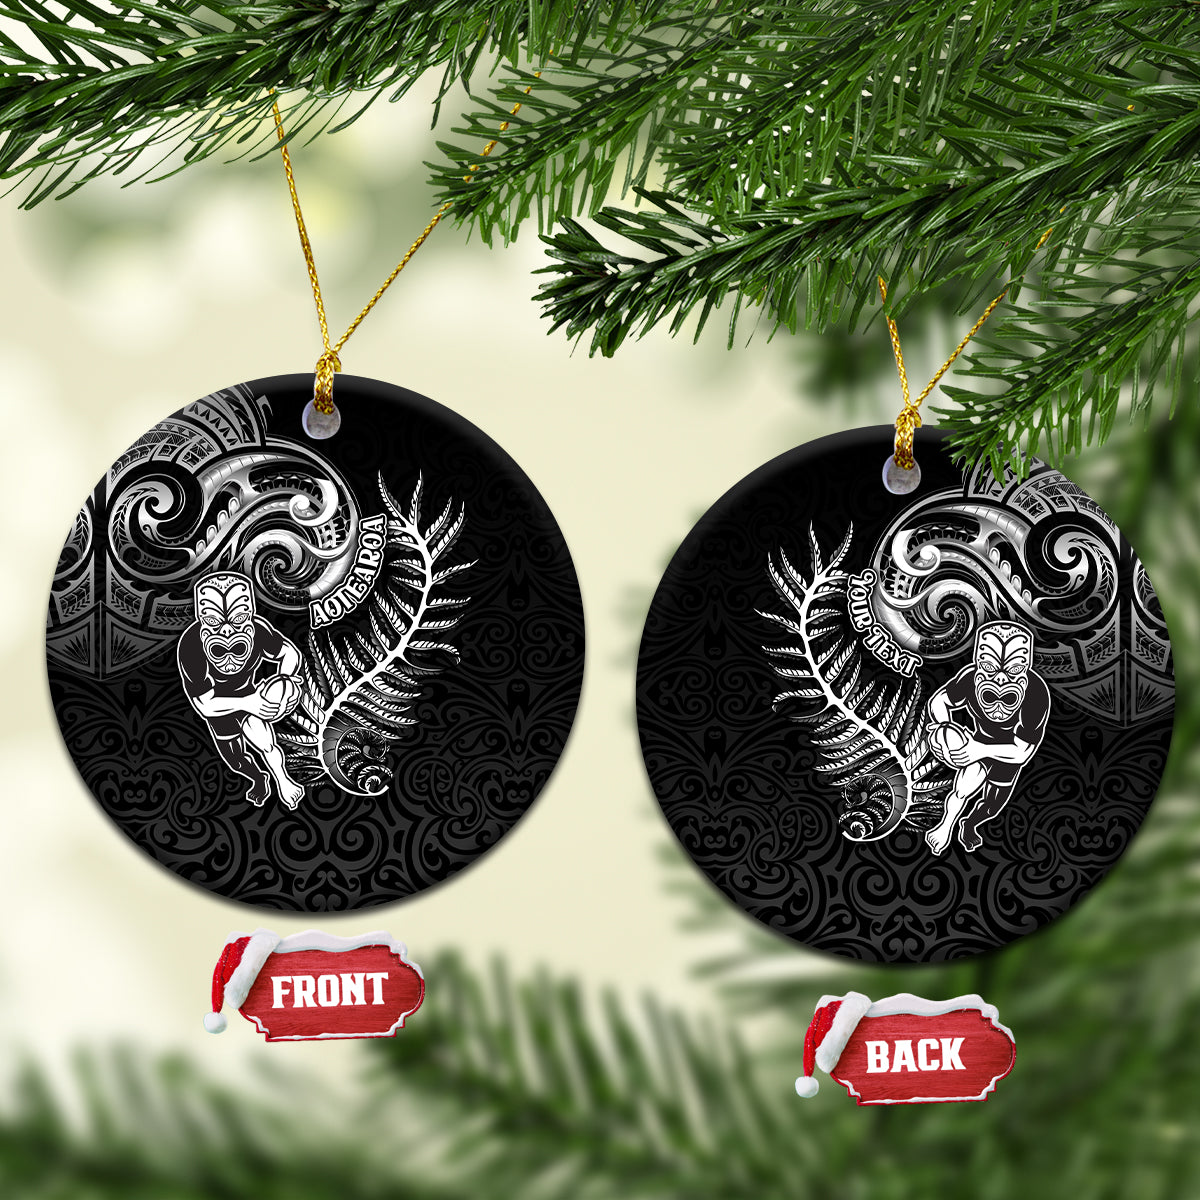 Personalised New Zealand Rugby Ceramic Ornament Maori Warrior Rugby with Silver Fern Sleeve Tribal Ethnic Style LT03 Circle Black - Polynesian Pride